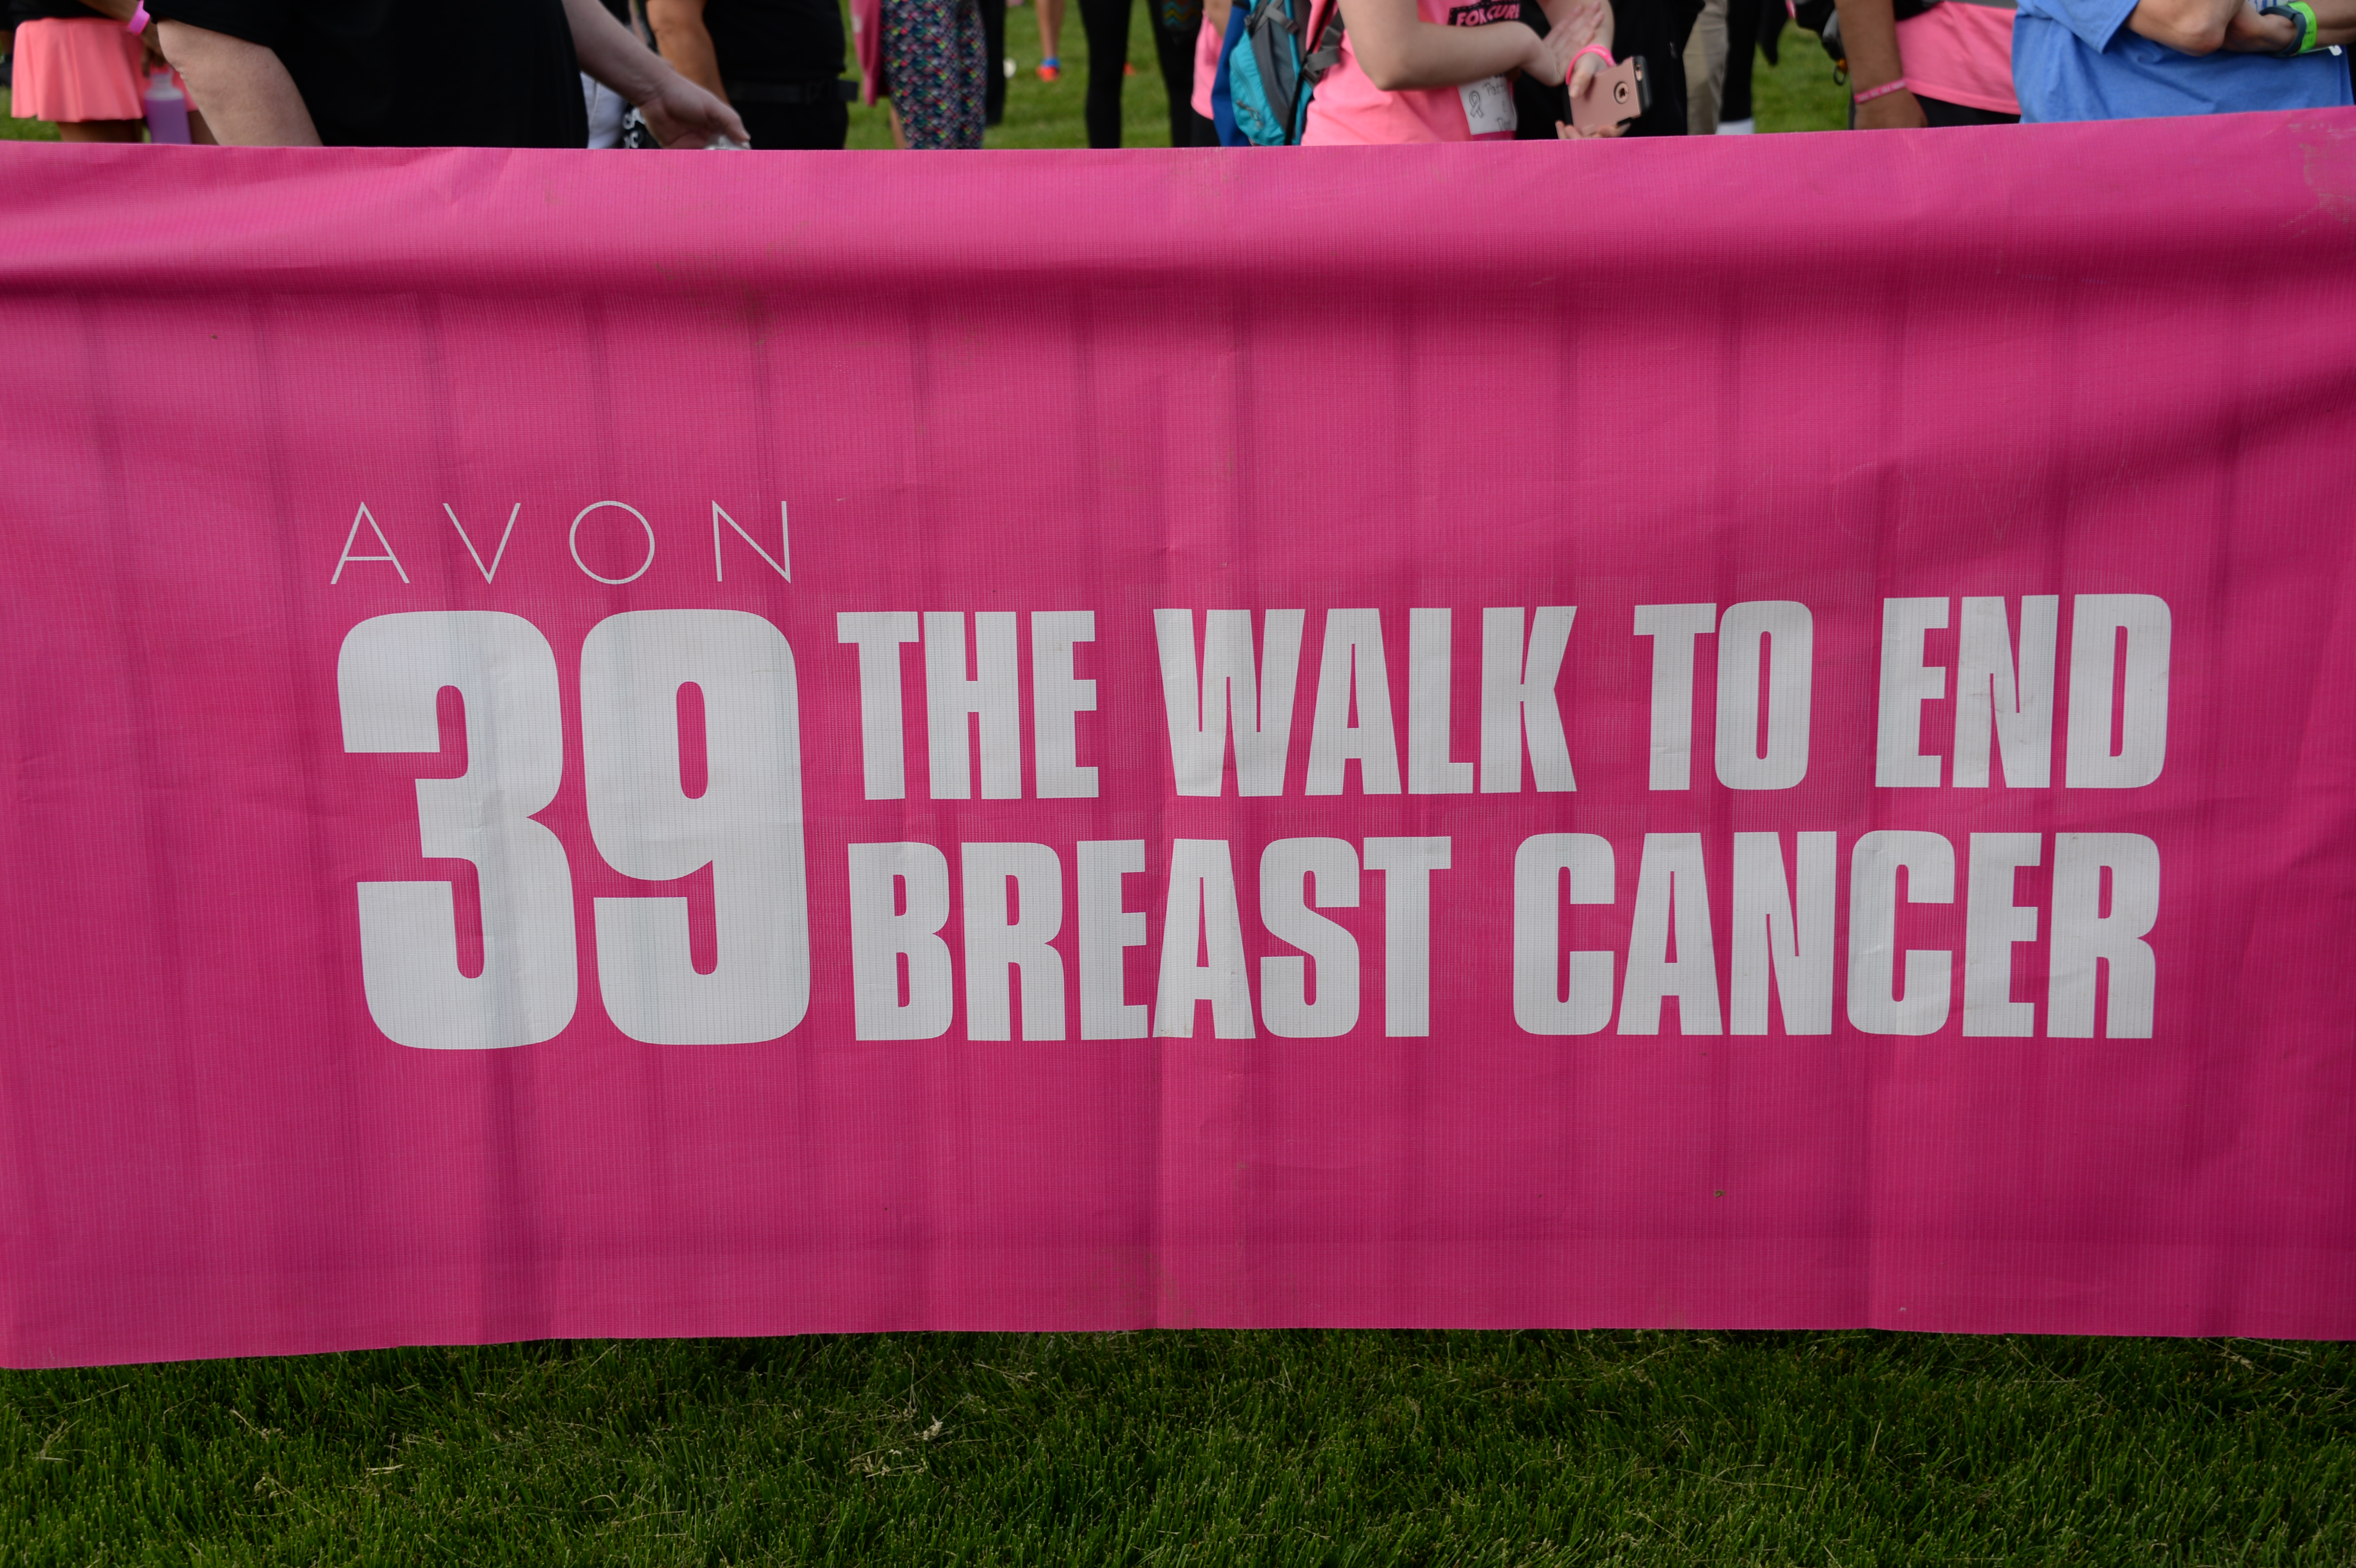 AVON 39 The Walk to End Breast Cancer is the largest fund-raising event for the Avon Breast Cancer Crusade. Since its launch by the Avon Foundation for Women 2003, more than 220,000 participants have trekked 6,868,000 miles and raised nearly $590,000,000 in the fight to end breast cancer. Funds raised at each event provide direct impact in the area where the event takes place, and also help make sure that care and research programs nationwide have adequate resources to make the most progress possible. For more information about AVON 39 The Walk to End Breast Cancer, visit www.avon39.org or join the #Powerof39 conversation on Facebook, Twitter, YouTube and Instagram.